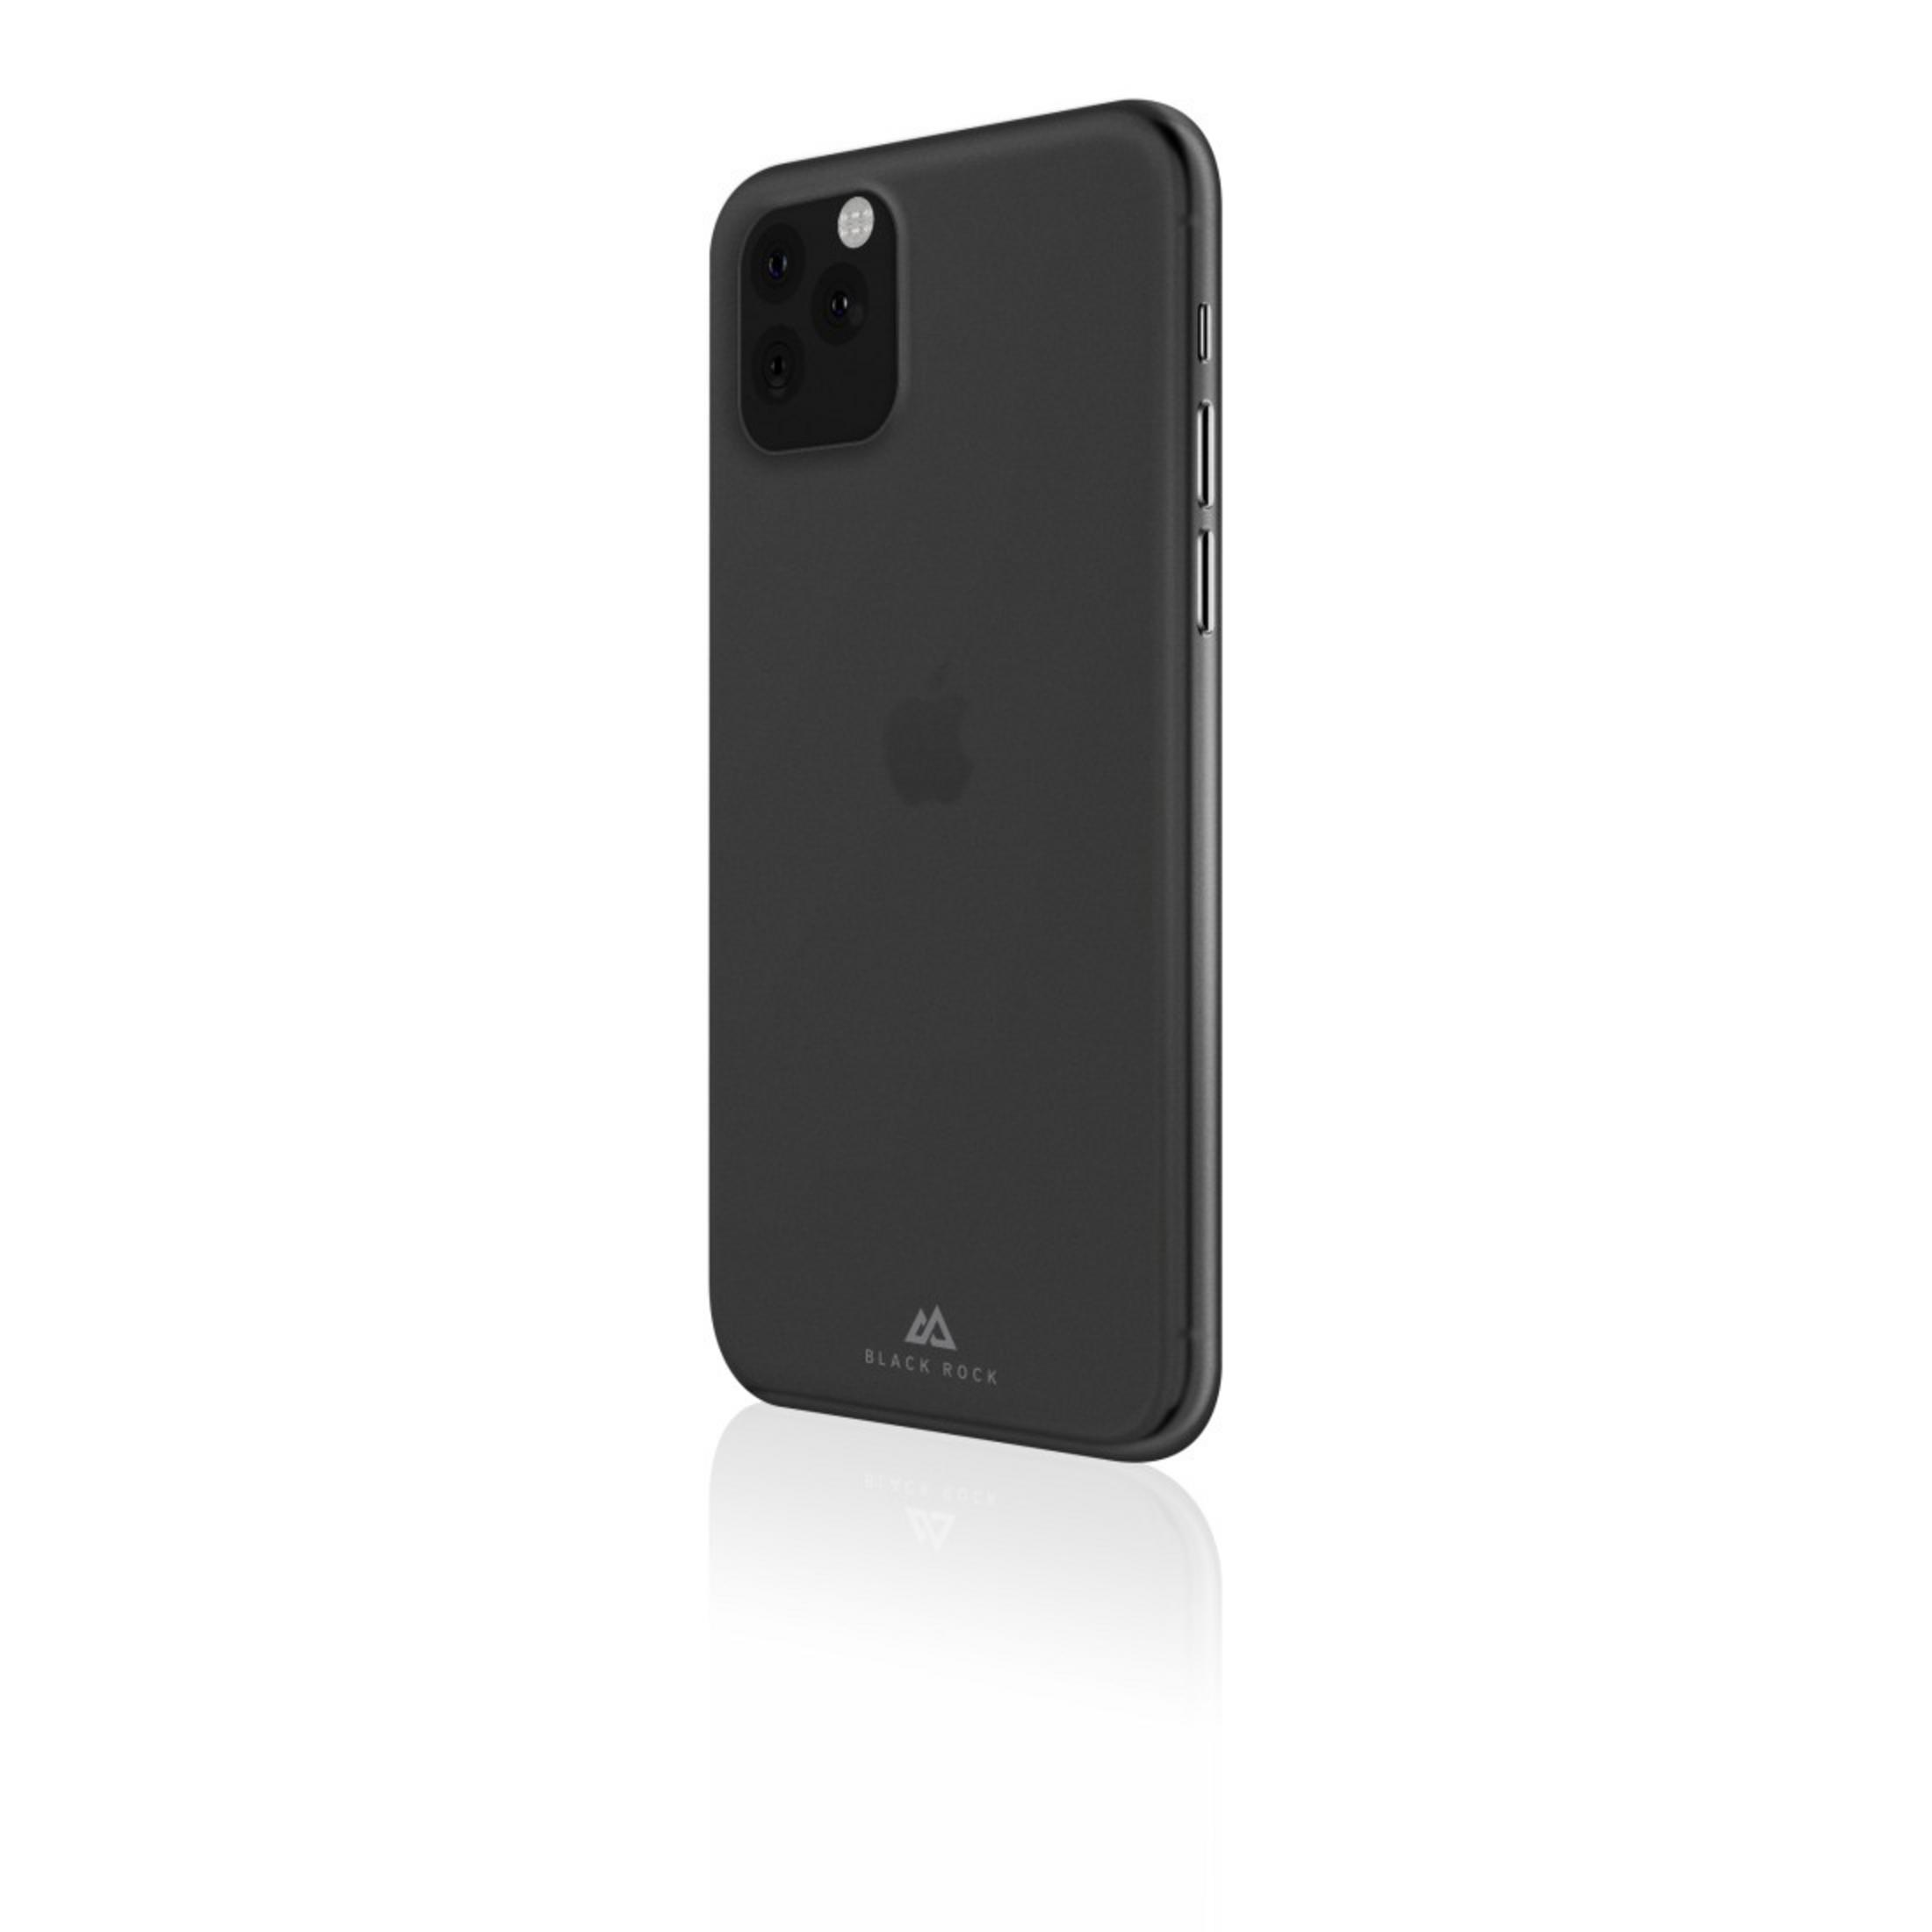 SW, ULT.TH.ICED IPH Apple, ROCK Backcover, iPhone 11, 11 Schwarz CO 187005 BLACK